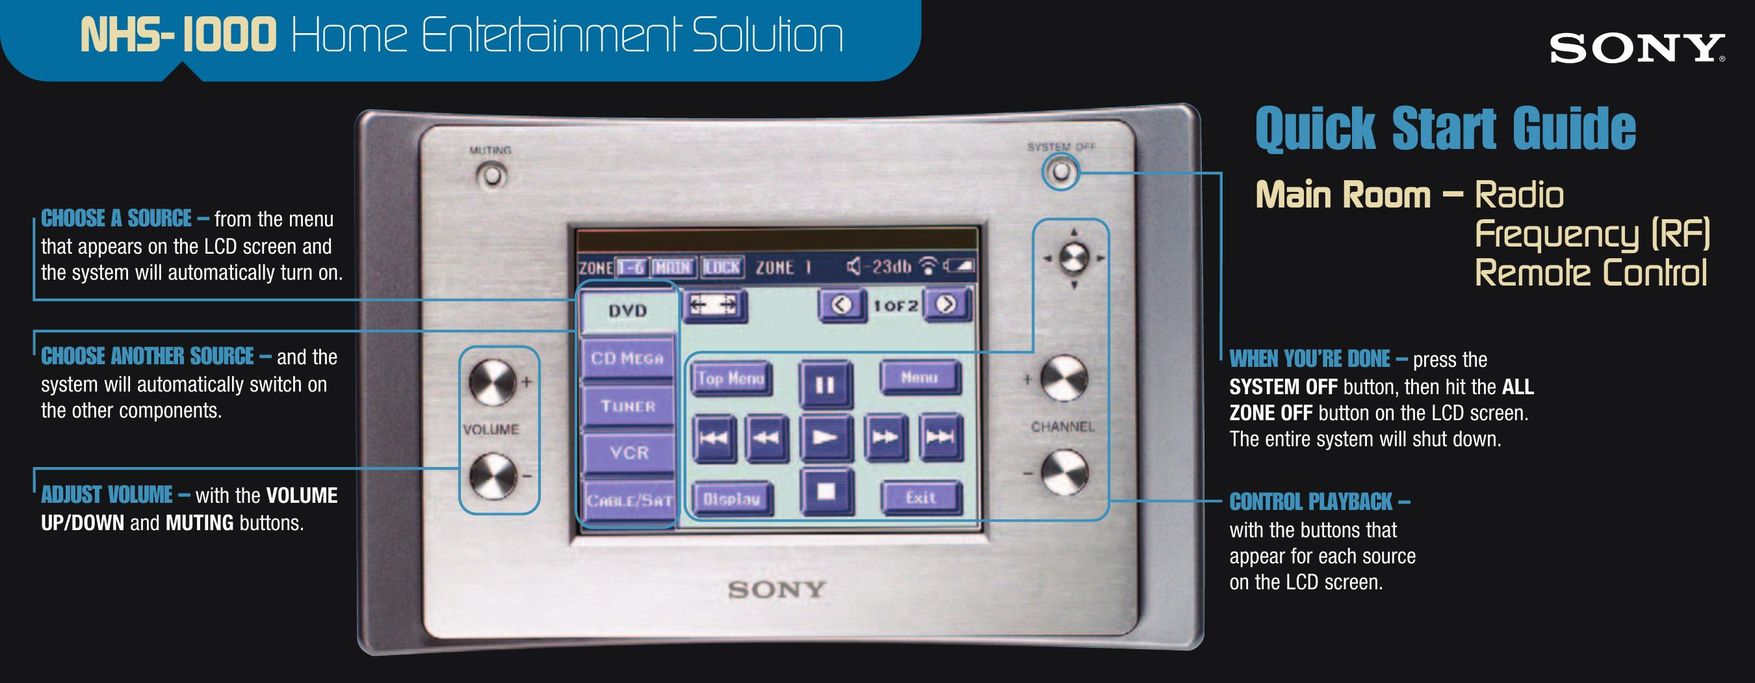 Sony NHS-1000 Universal Remote User Manual